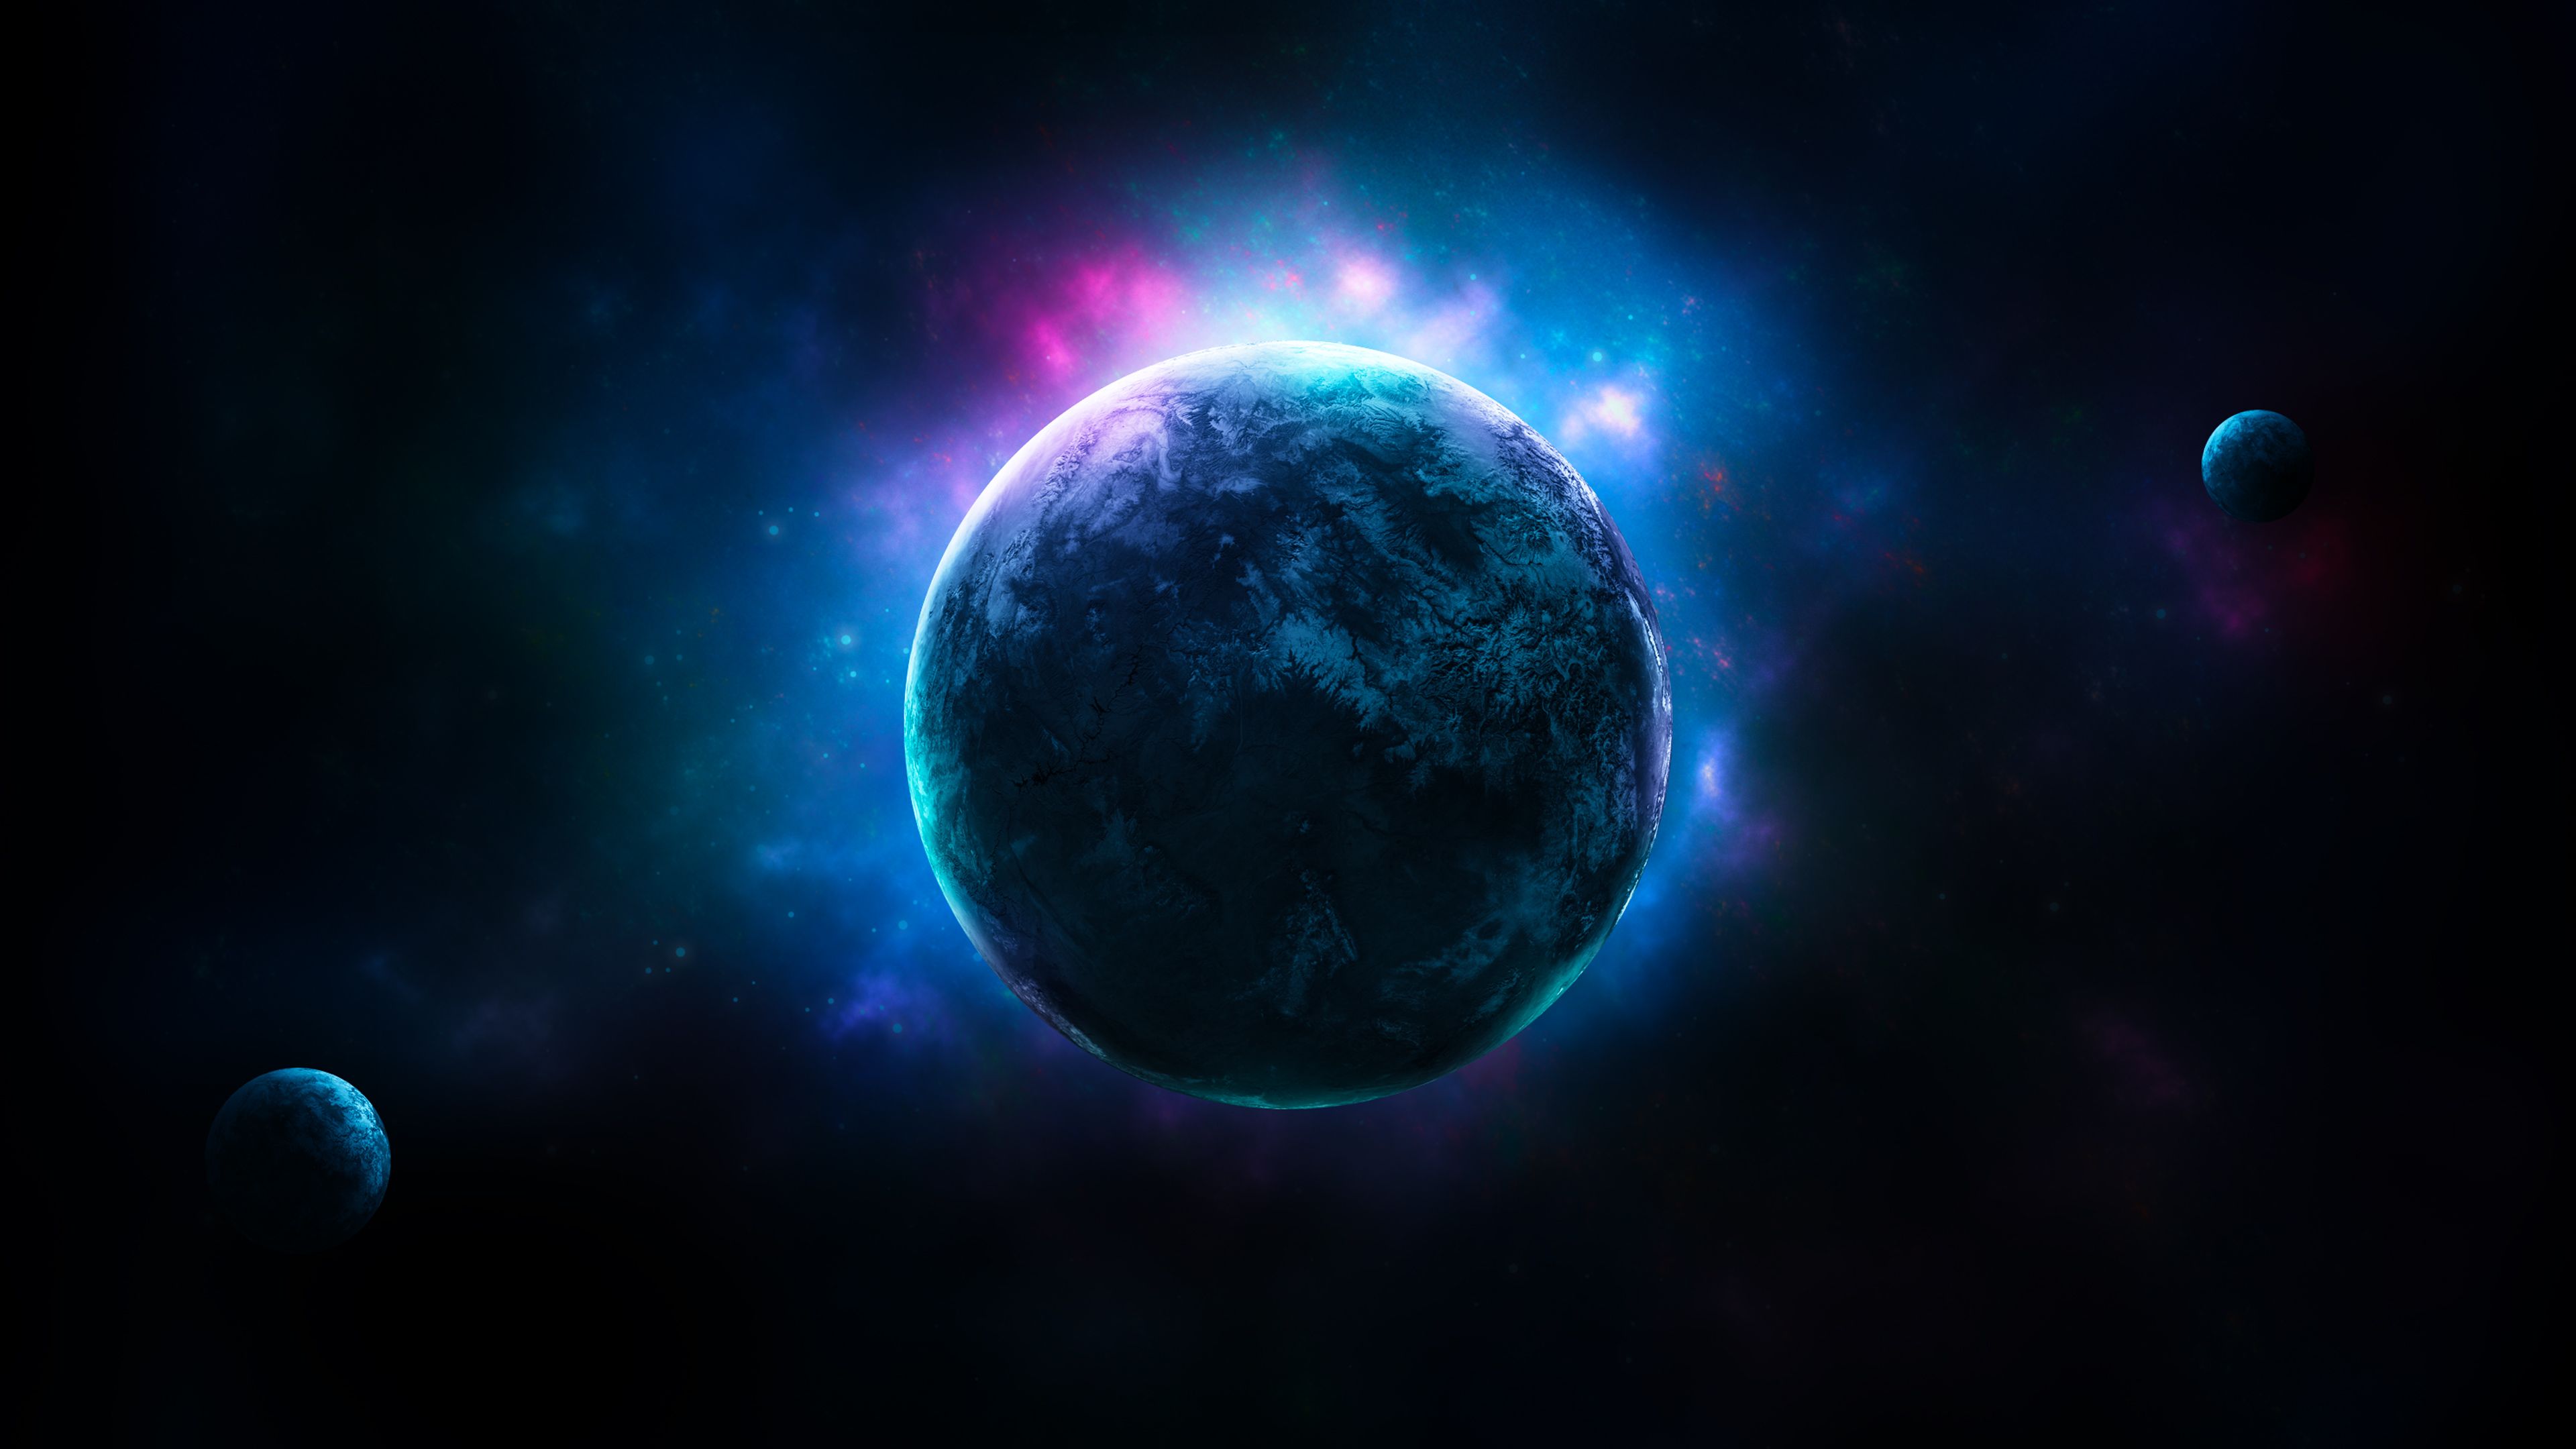 Wallpaper Planets, Dark space, 4K, Space,. Wallpaper for iPhone, Android, Mobile and Desktop